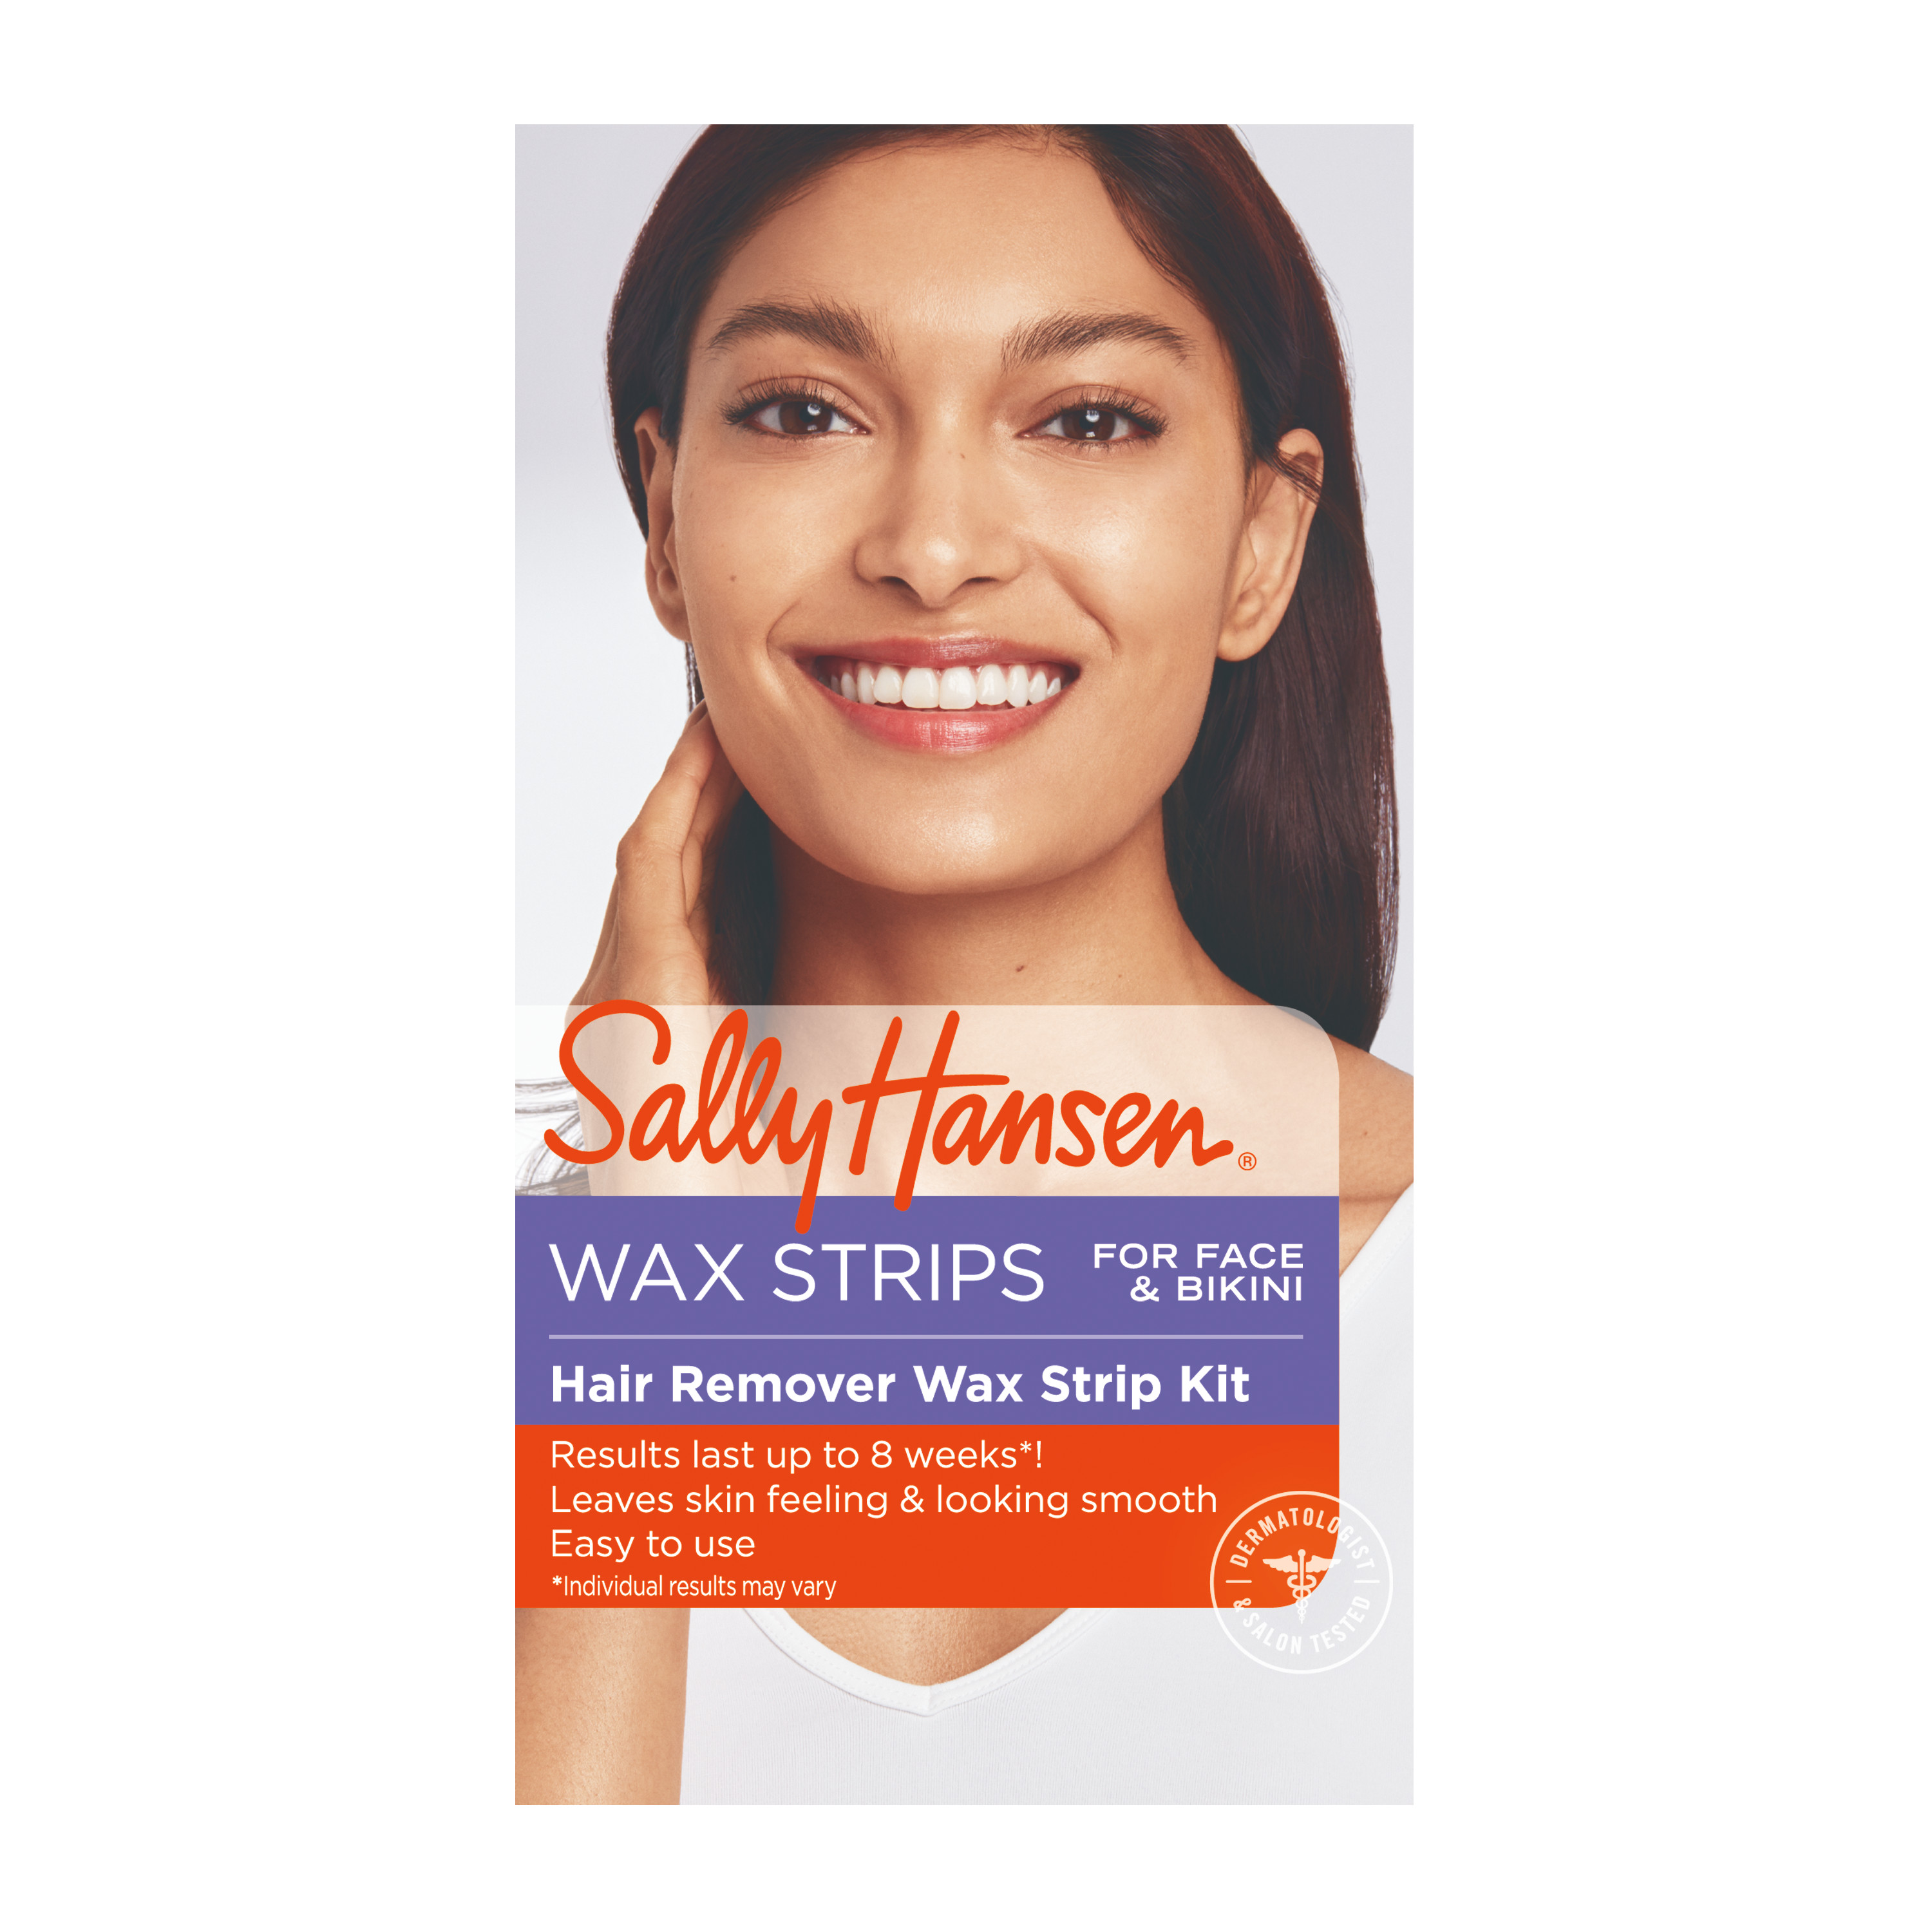 Sally Hansen Hair Remover Wax for Face, Body, and Bikini, Pack of 34 Wax Strips, Salon Quality Results - image 1 of 5